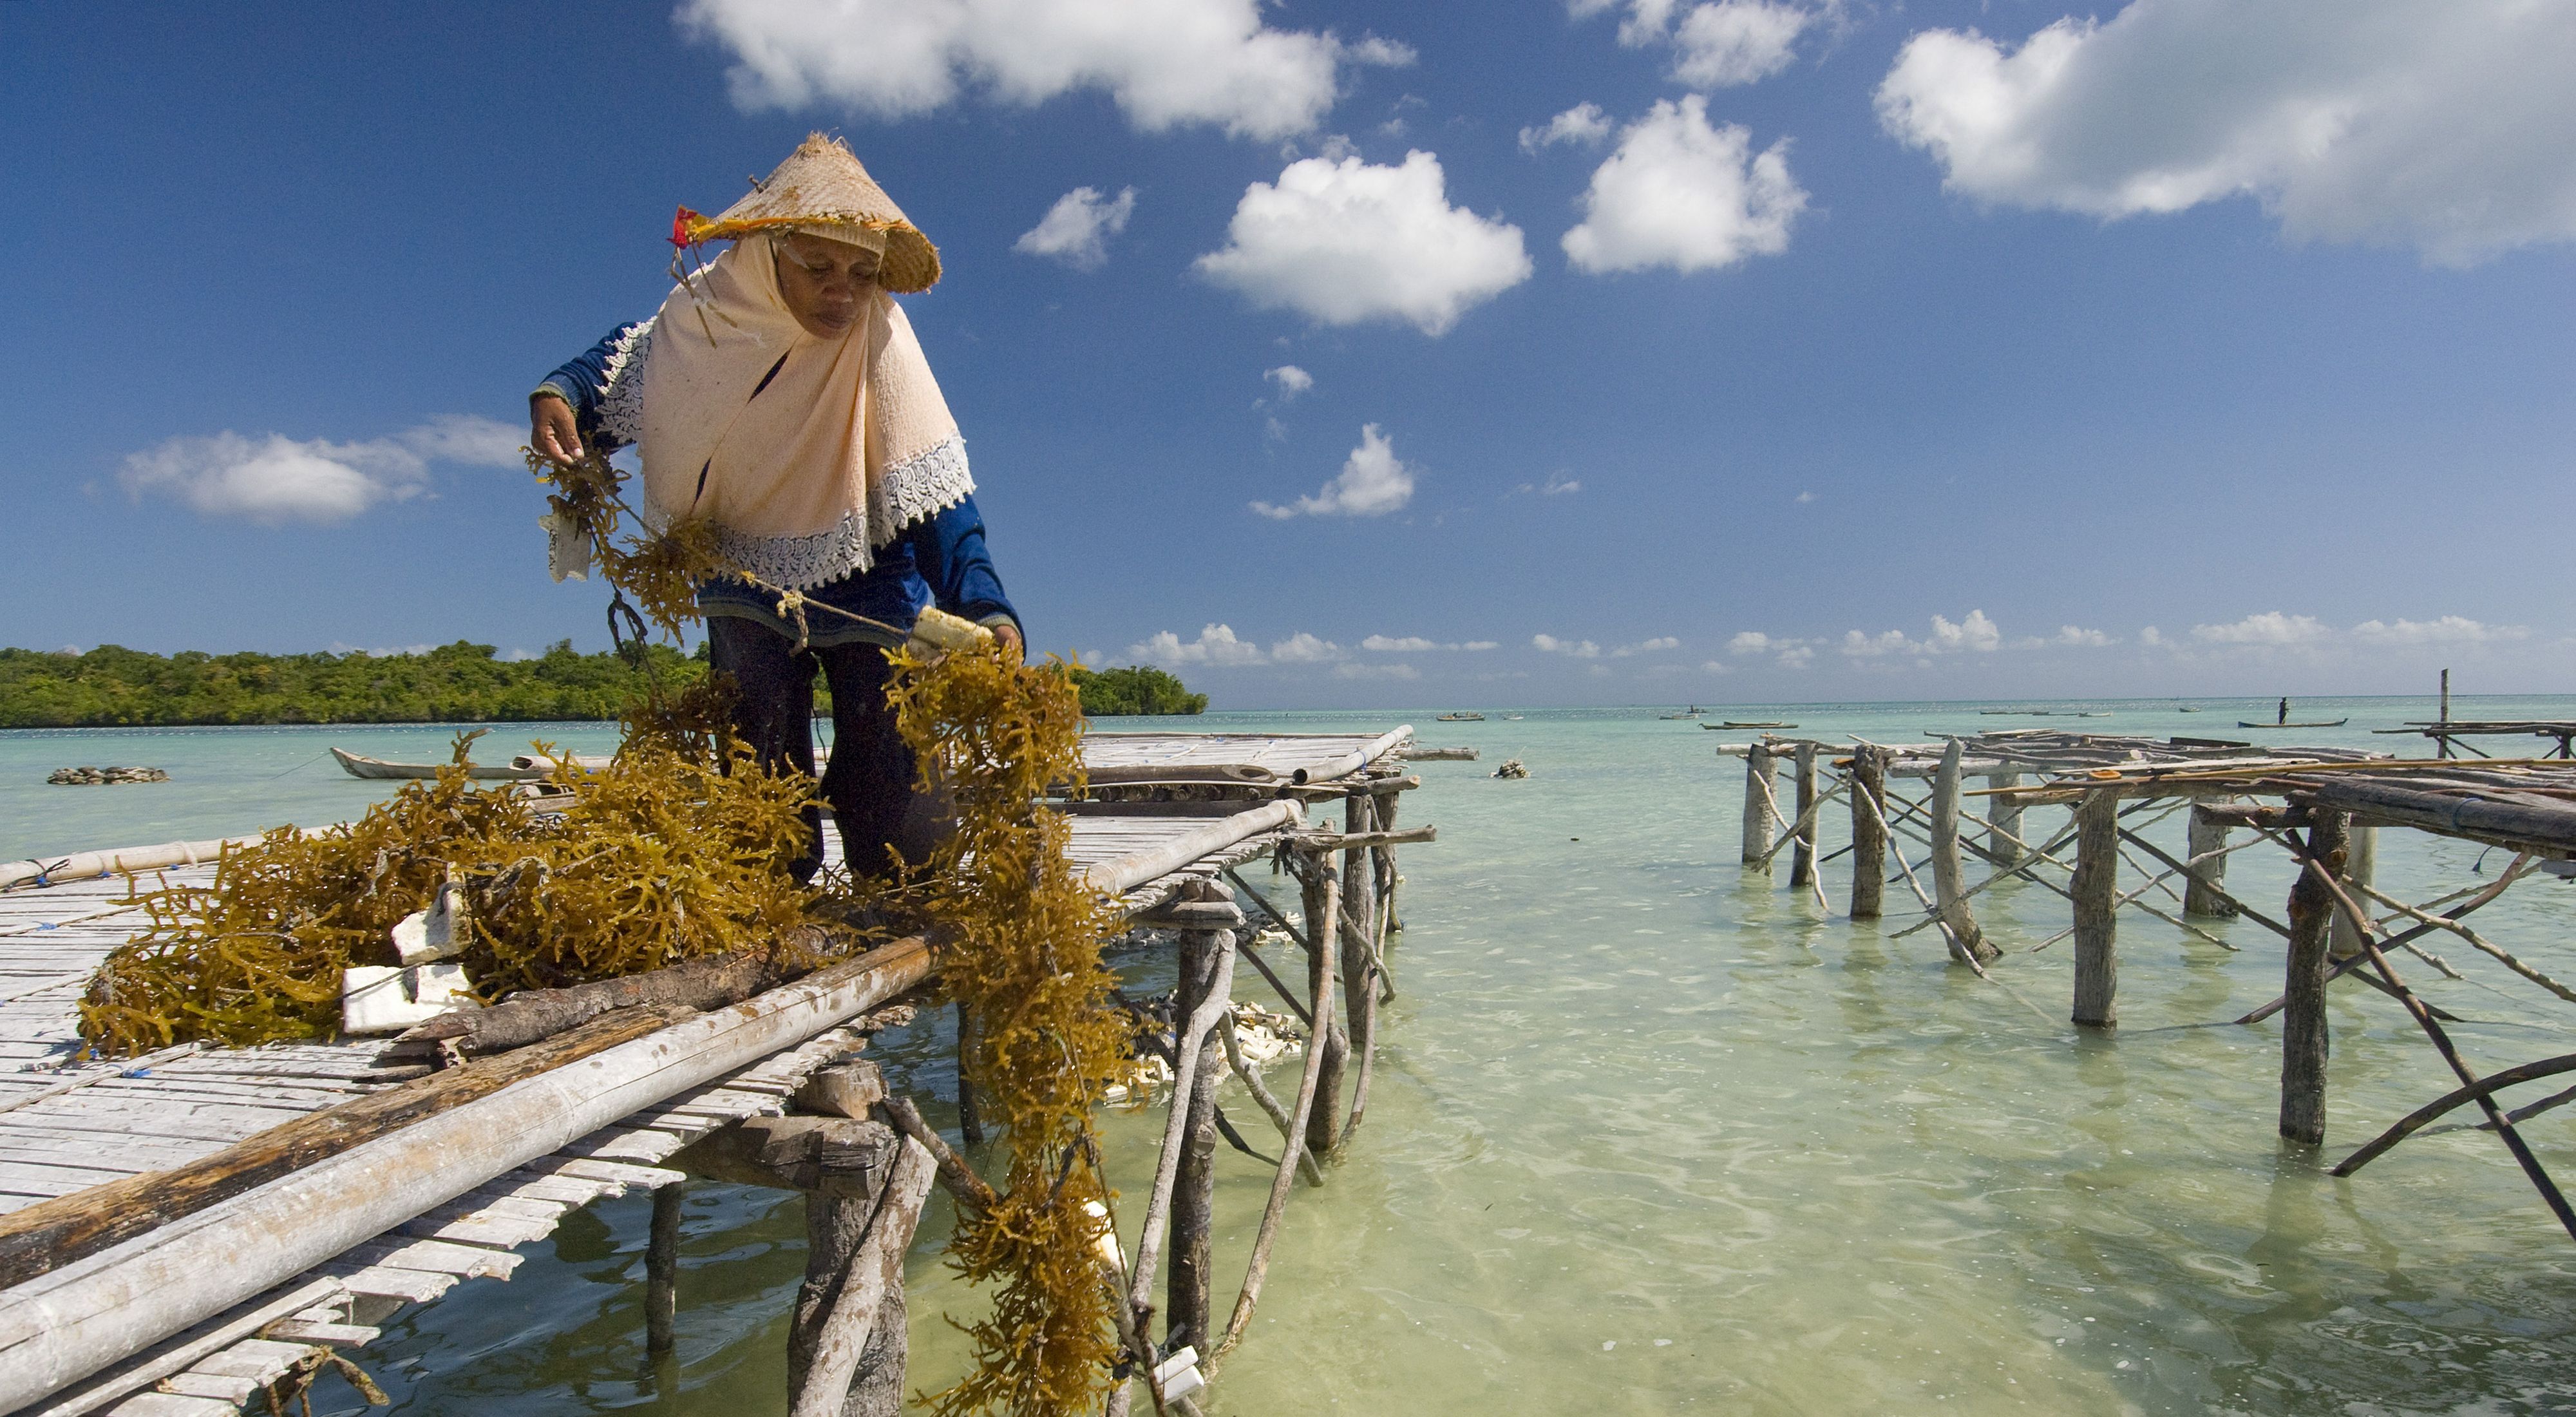 A woman standing on a dock pulls a line of seaweed out of the water.